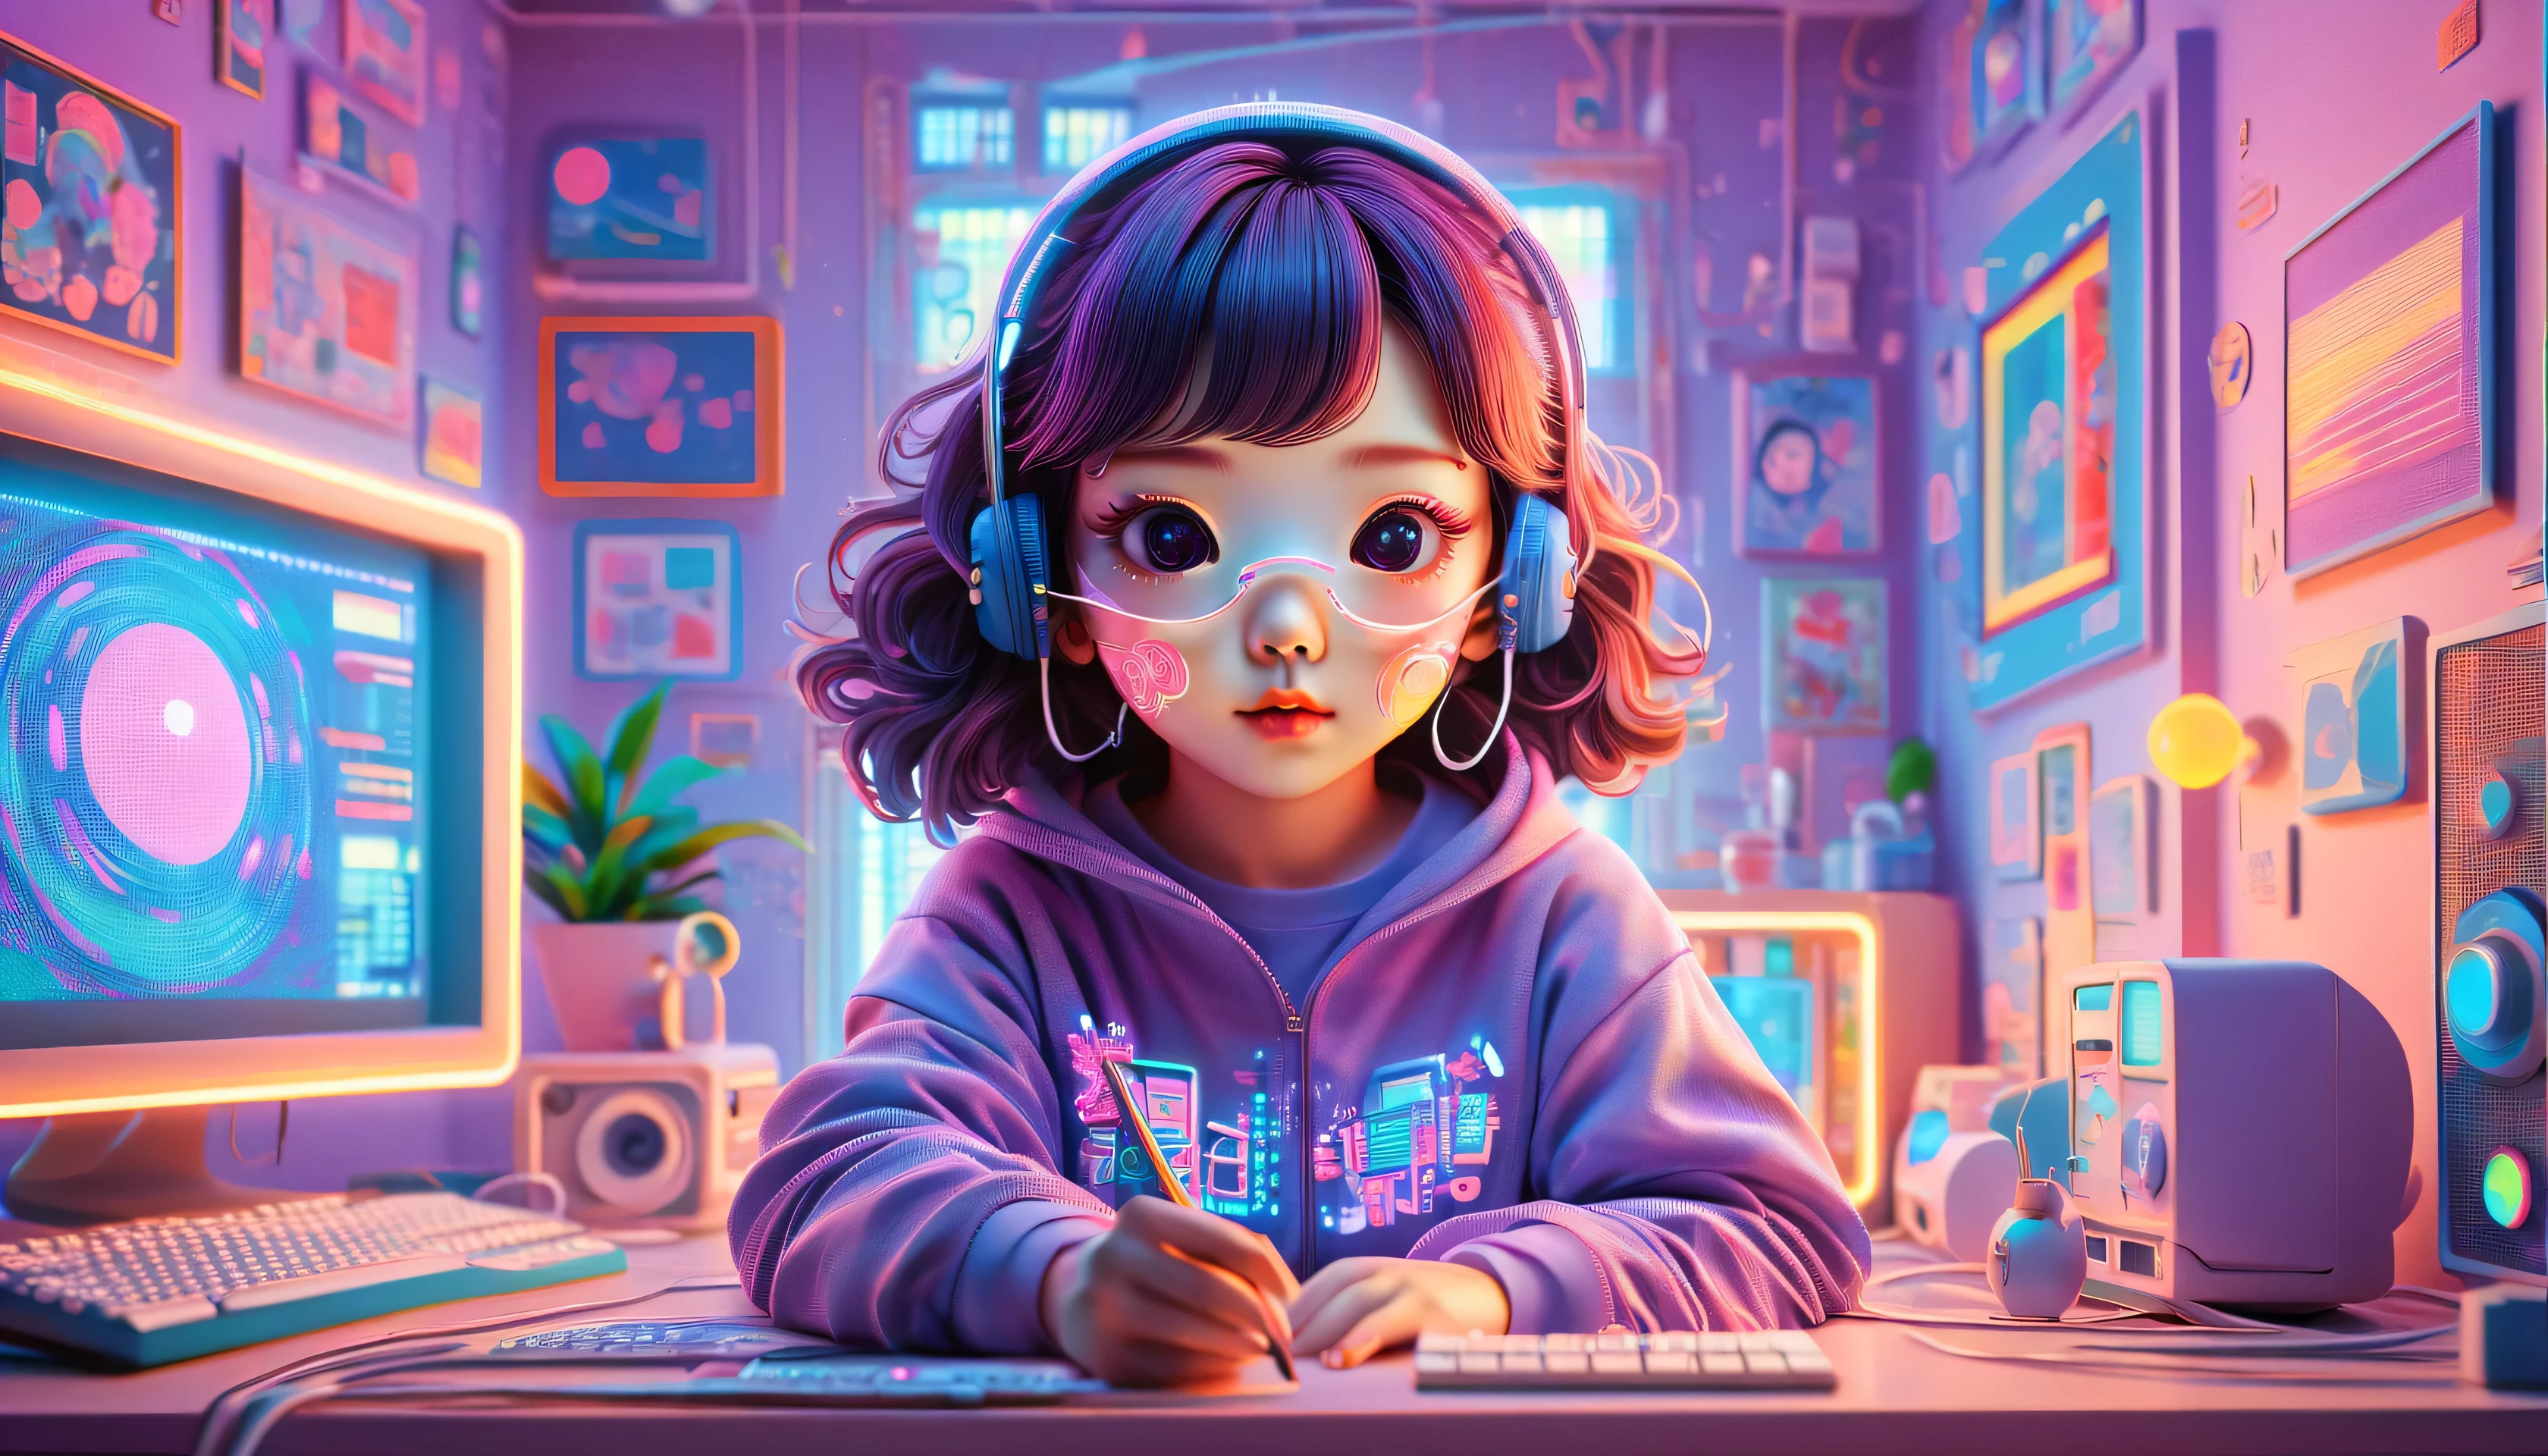 in style of Vaporwave, beautiful detailed, Vector illustration, Minimalistic, Digital illustration, vector illustration，Minimalism，digital illustration，Hackers wearing sweatshirts and masks working on，T-shirt design，dramatic lighting，Trends at art shows ，Award-winning，icon，Highly detailed cute bubbly Korean girl 8 years old Shim Eun Kyung chilling in home (D screen），（happy），（）Hold the microphone in your hand），（Jumping pose，dynamic action），Inspired by《strange her》，Shim Eun Kyung wears her hair in a slightly curled baby style，Very fair skin，，Wearing a purple embroidered lace dres
